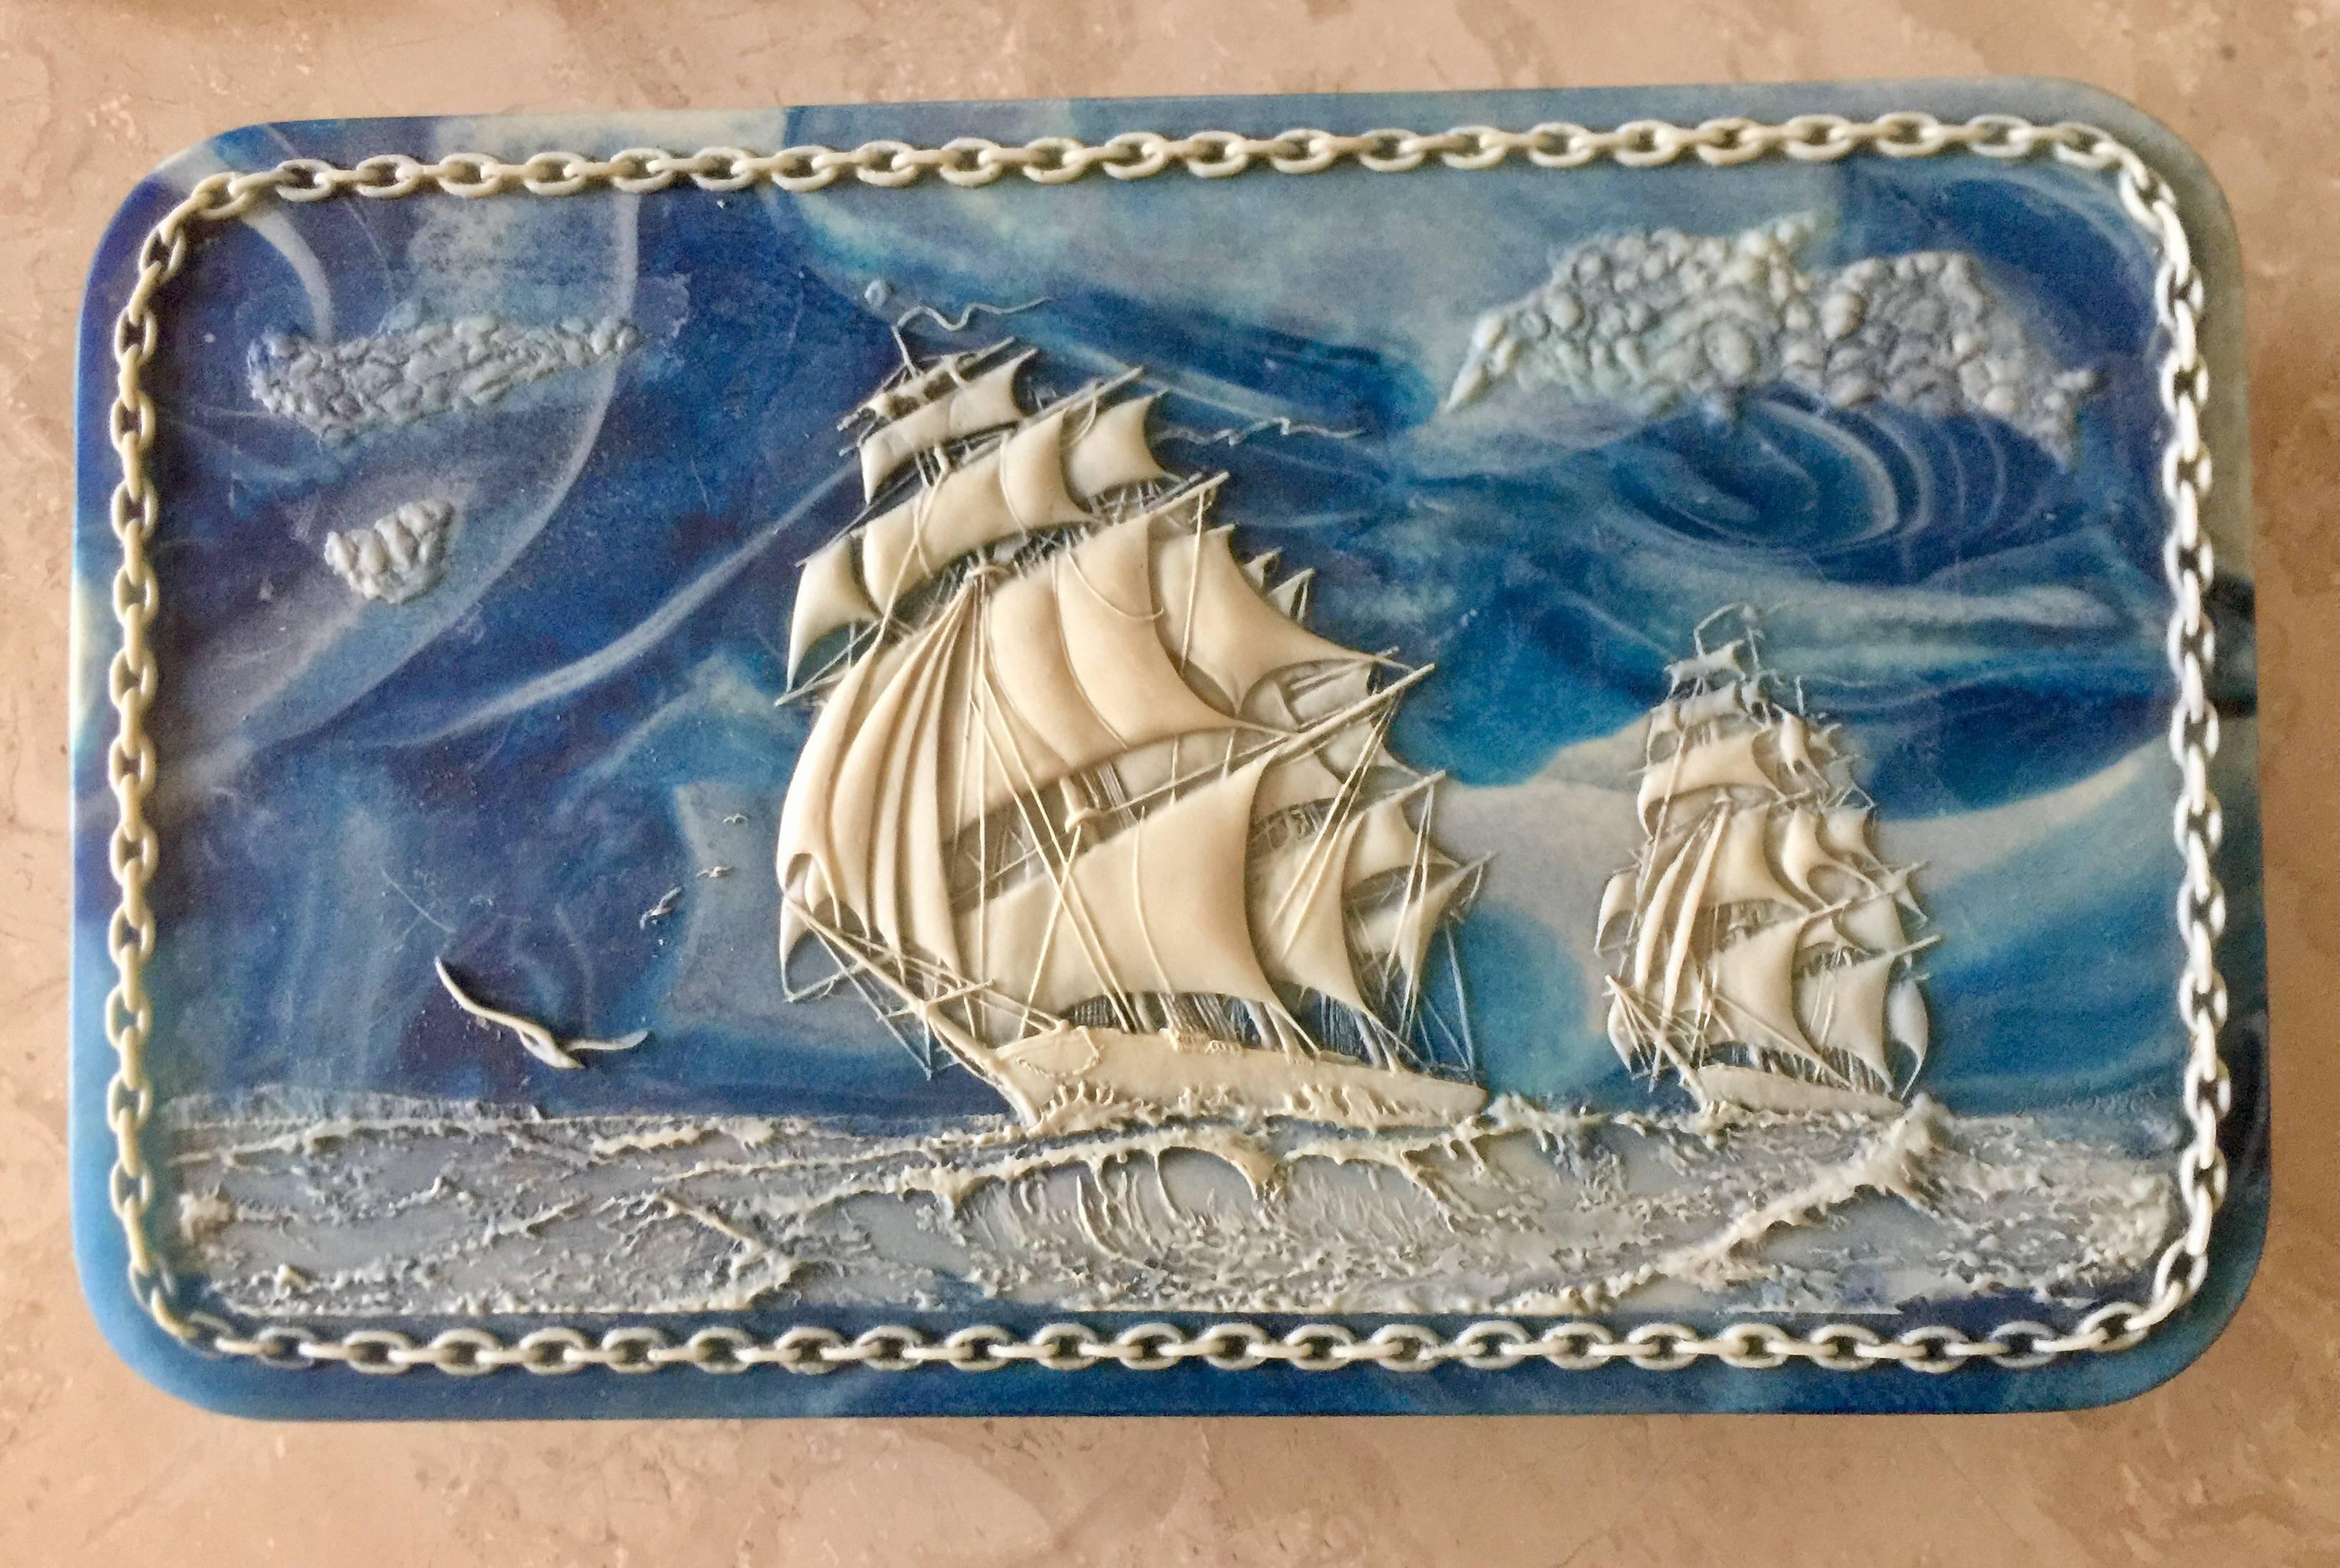 Super incolay vintage hinged box featuring sailing ships all the way around. Really a stunning piece and vintage. Measures 13 x 3 x 7"

Incolay stone is a complex combination of quart based minerals such as rose quartz, sapphire blue,